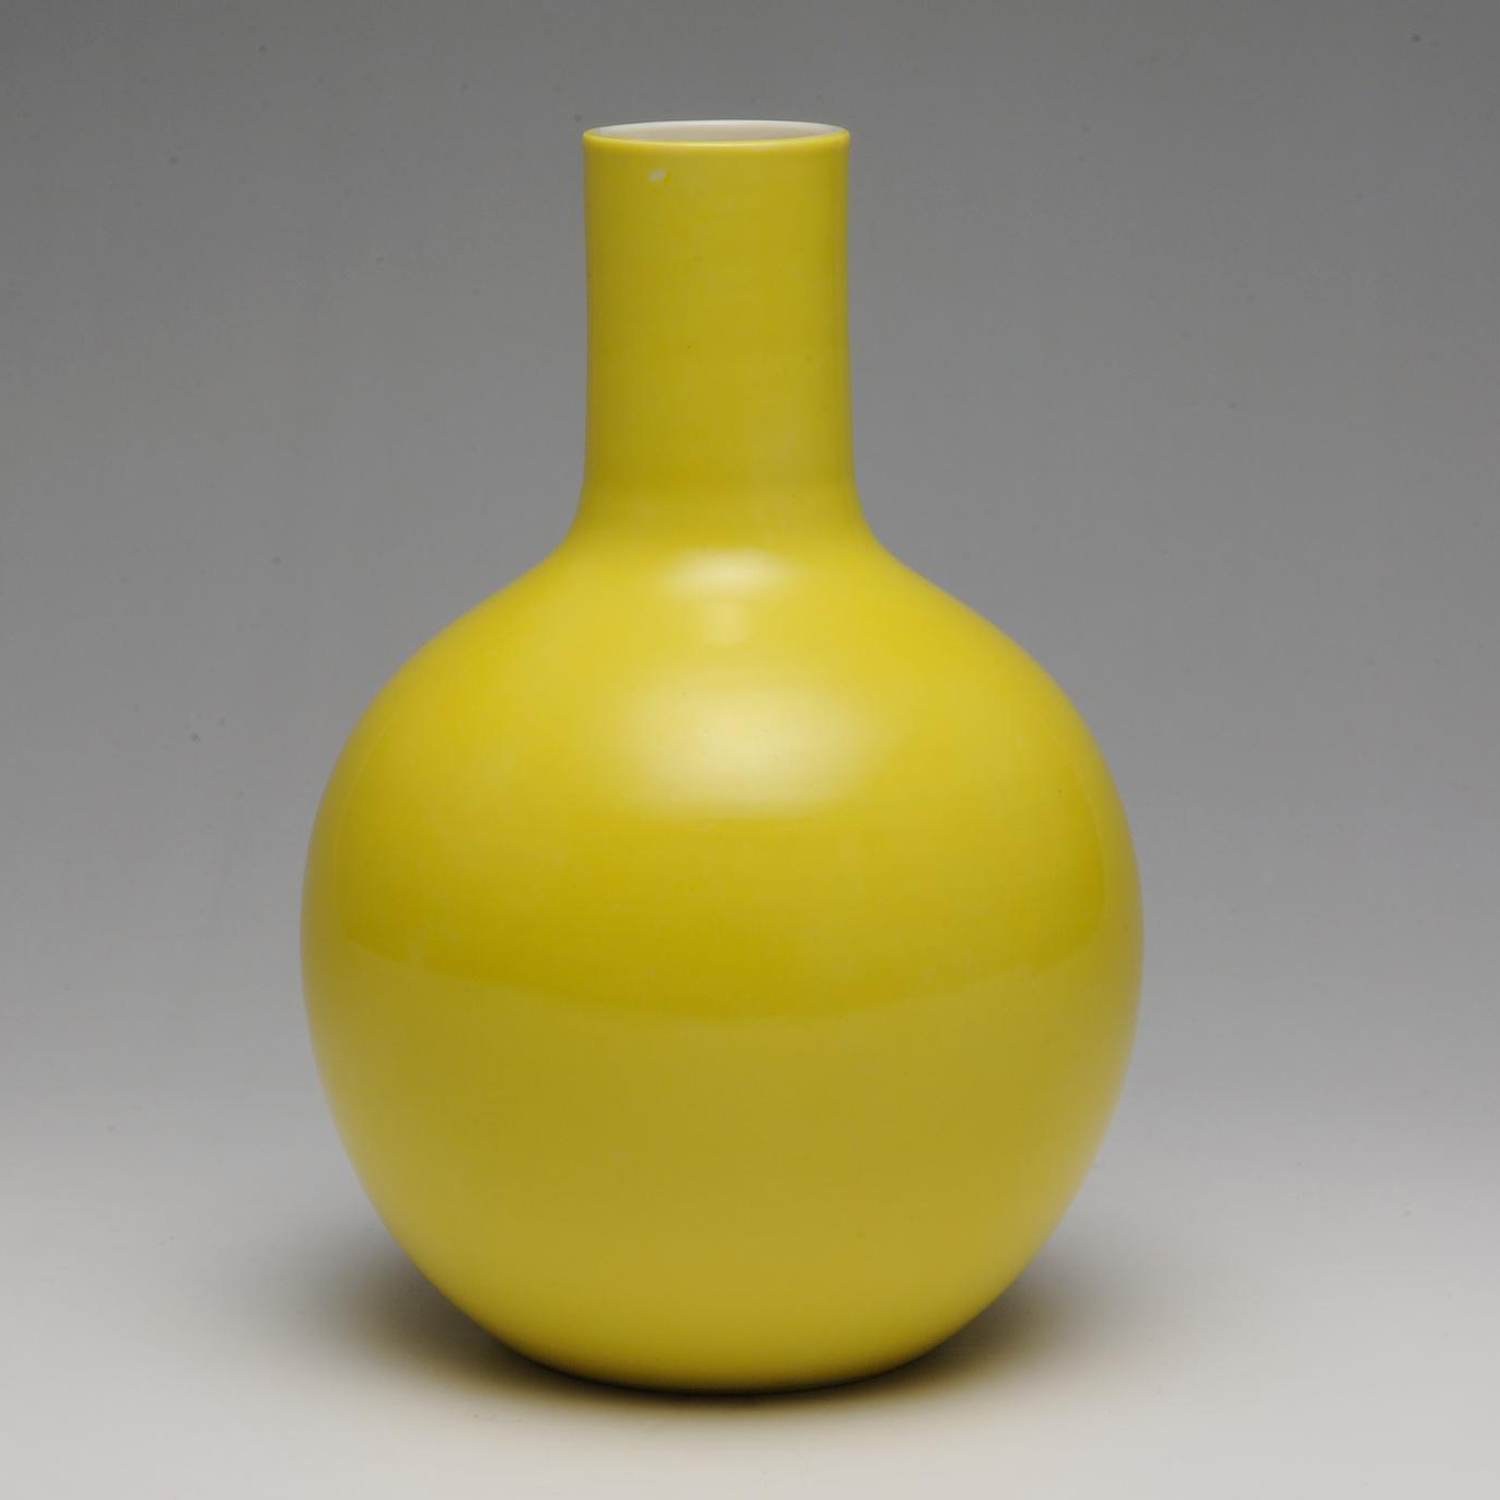 Globular vase of porcelain with glaze emulating chicken-fat yellow of the Ming dynasty: Japan, by Seifu Yohei III, 1890s